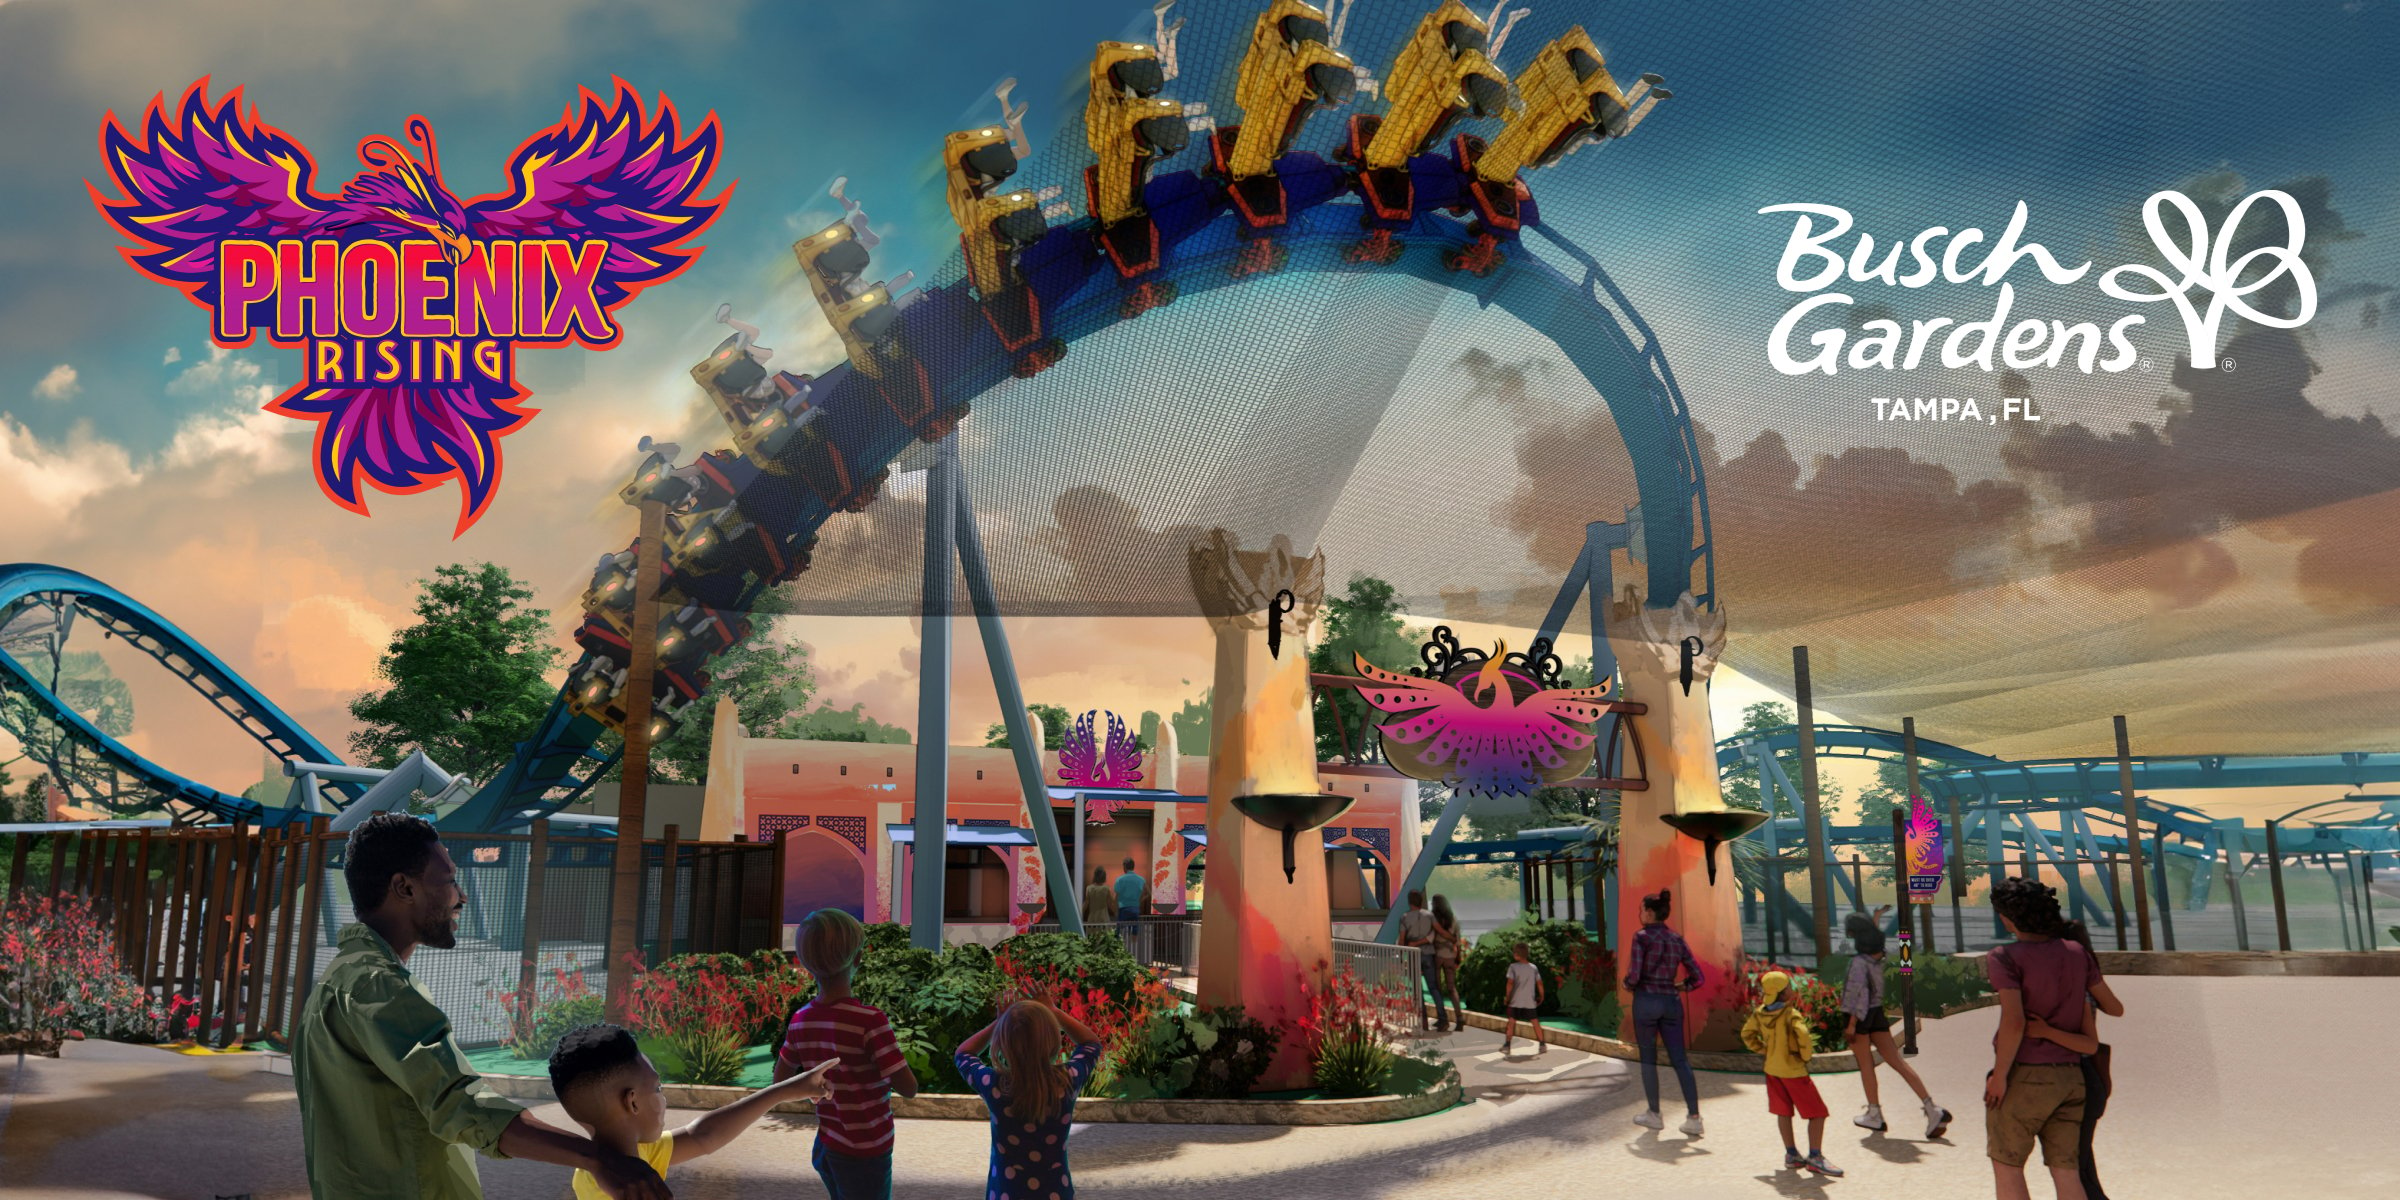 Phoenix Rising, ALL-NEW family-friendly suspended roller coaster coming to Busch Gardens Tampa Bay.